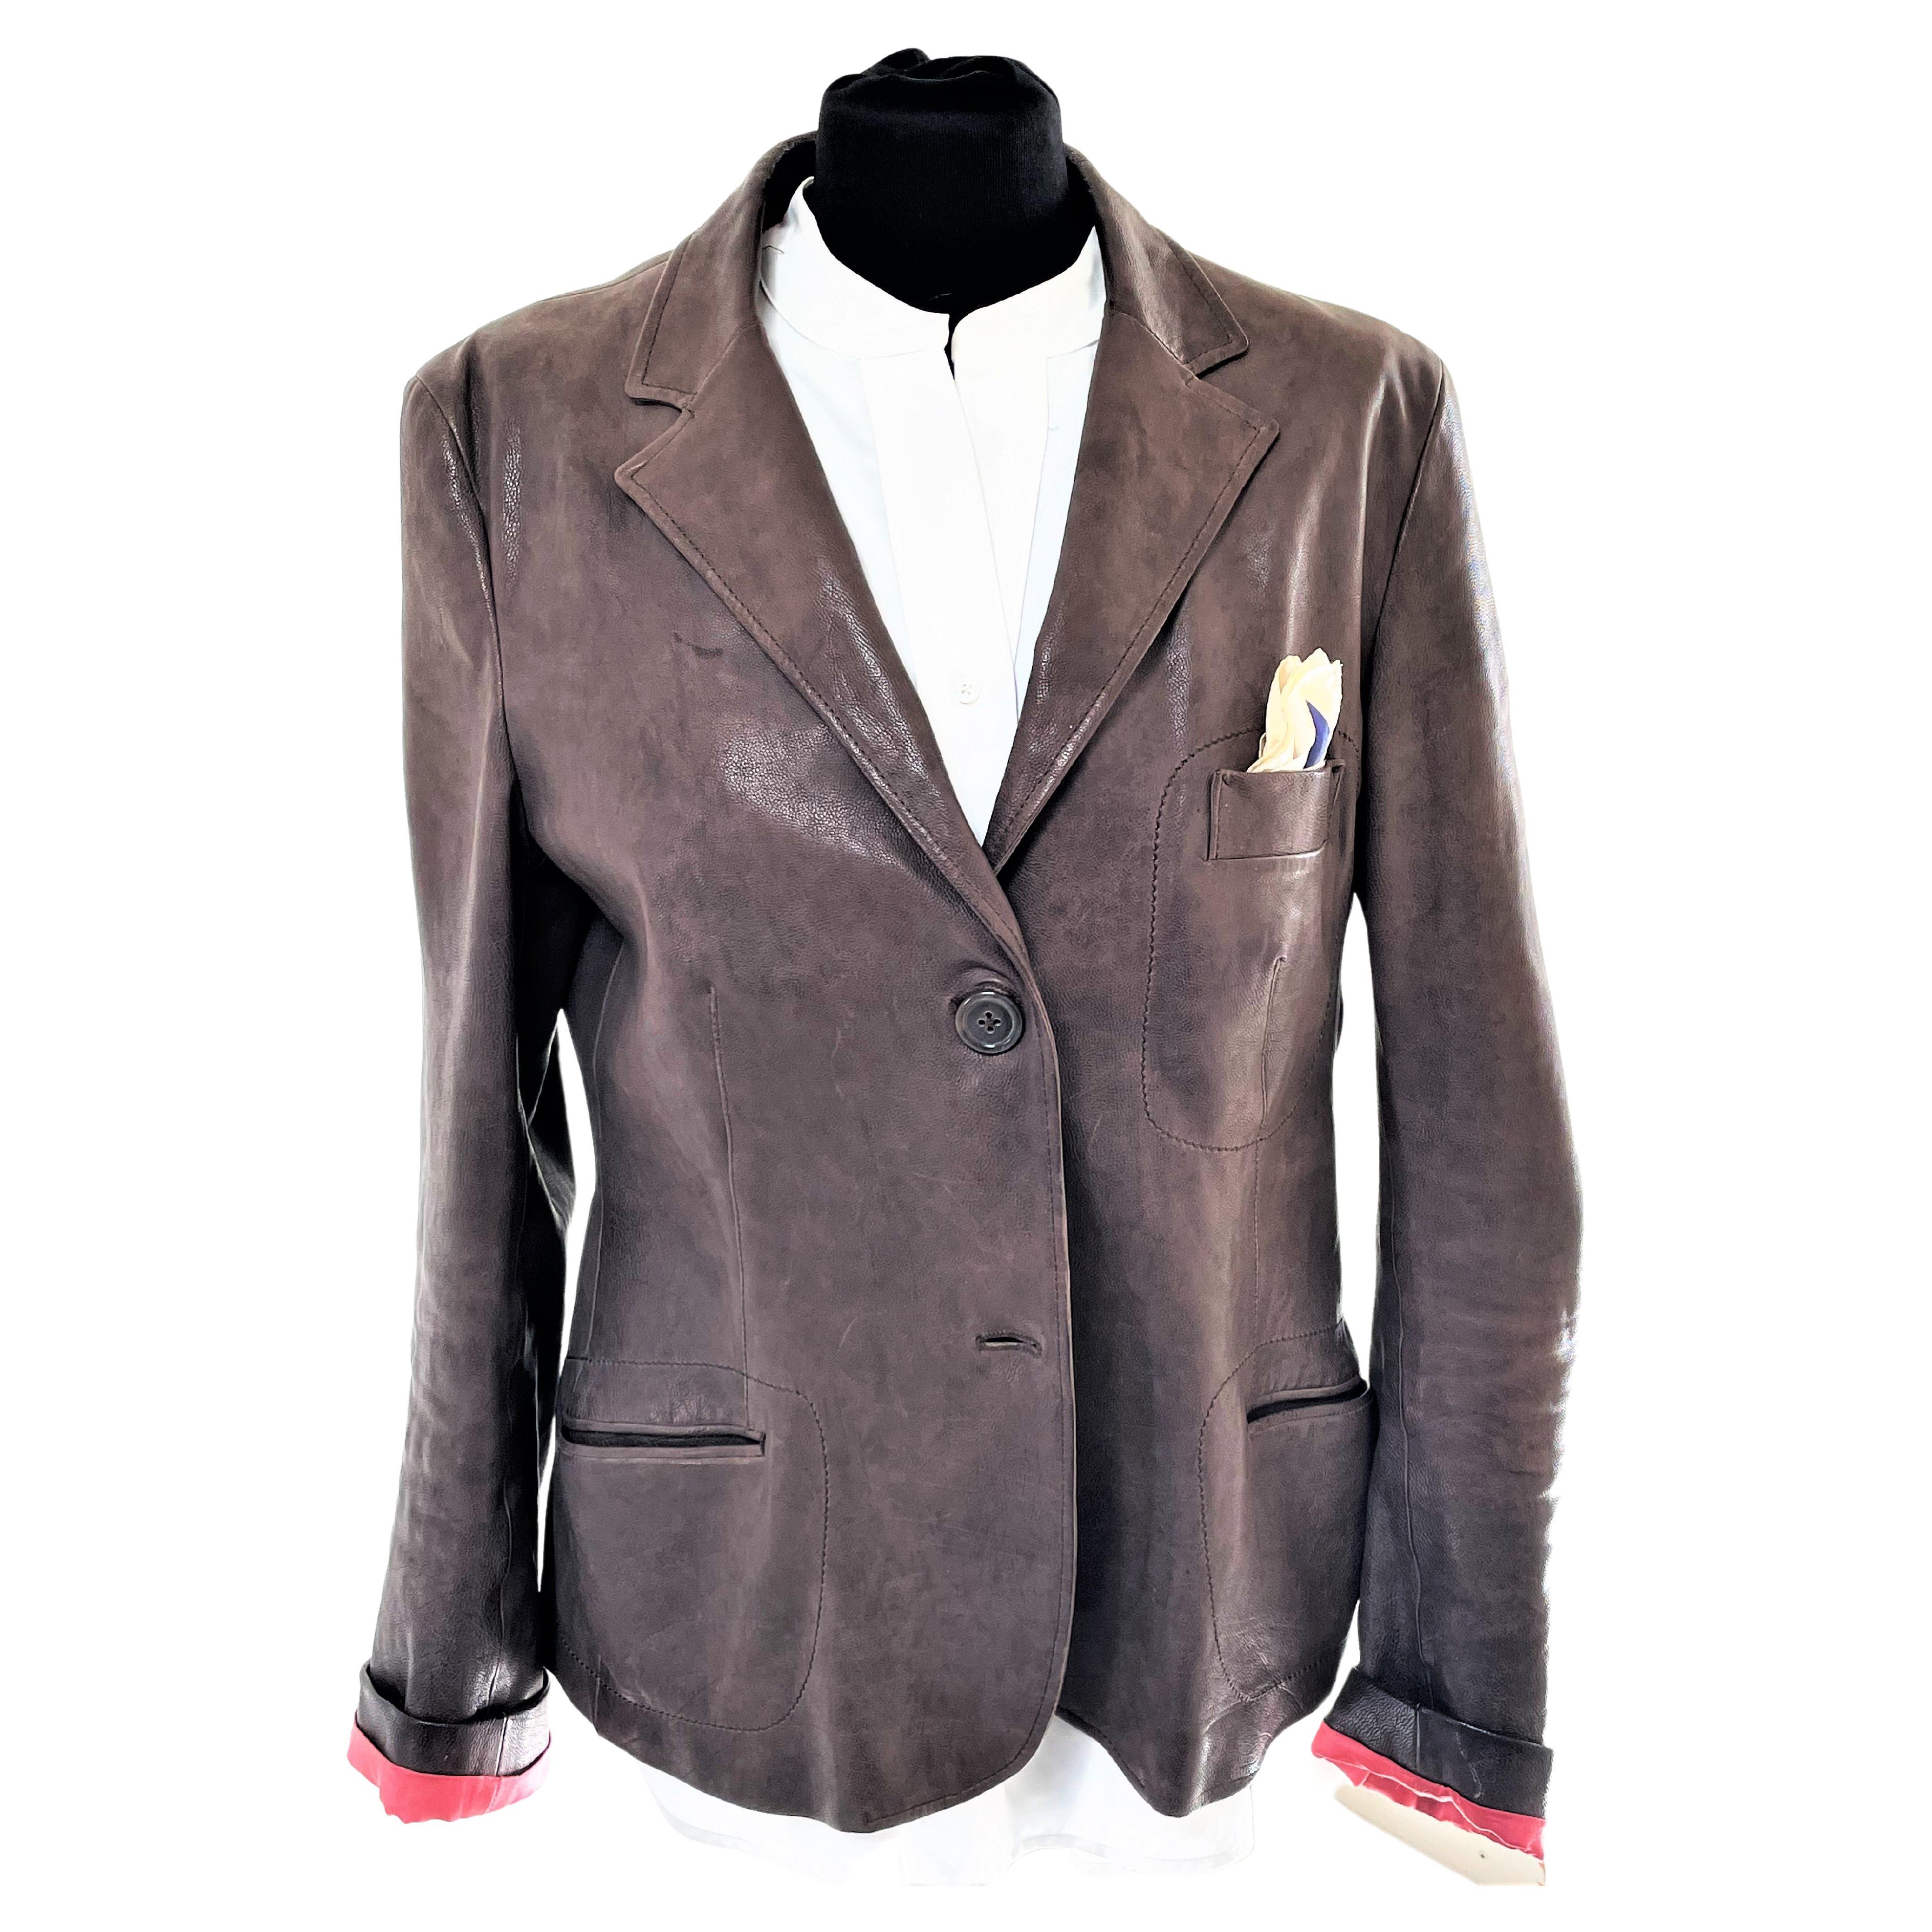  Smooth Leather Blazer by Jil Sander brown, pink lining size 44 For Sale